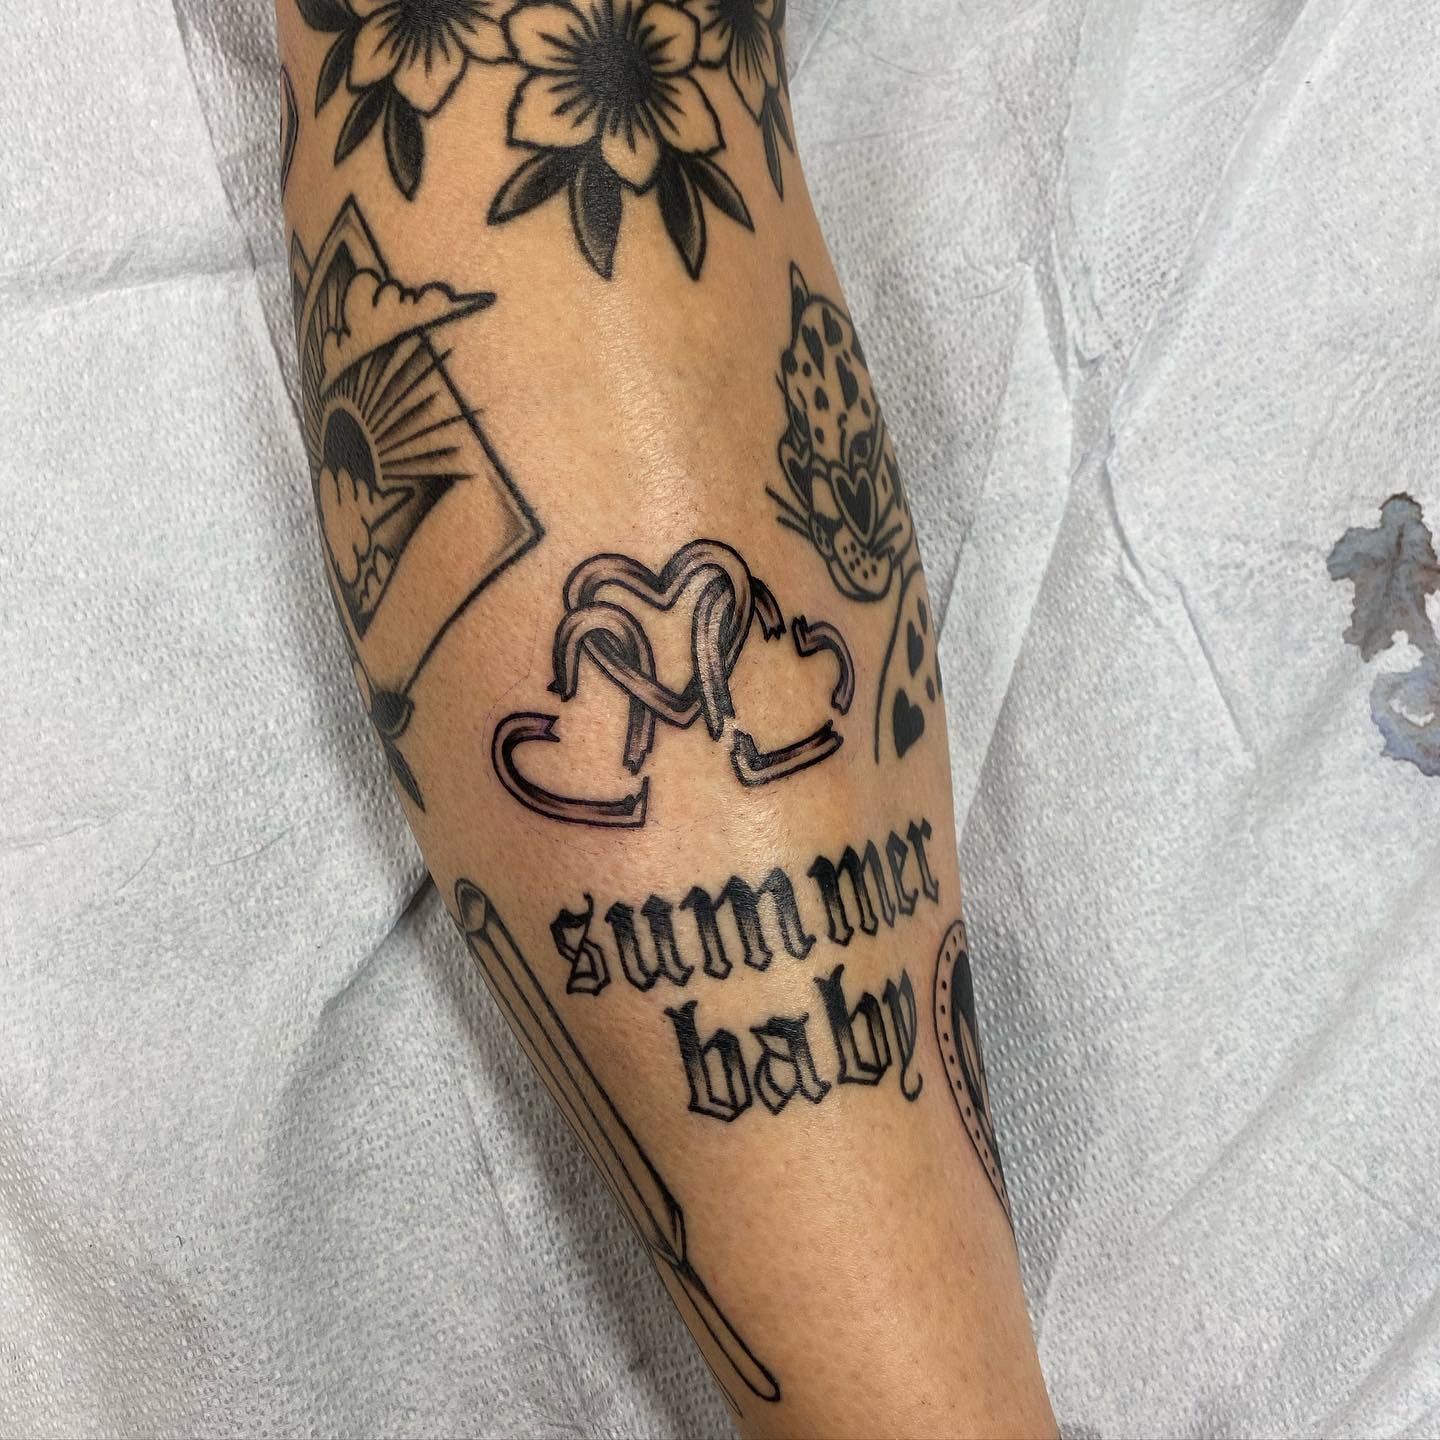 Added some filler to this lower leg, Hearts are fresh and the rest is healed ✨ 

#tattoo #healedtattoo #chaintattoo #blackworktattoo #boldwillhold #traditiknaltattoo #letteringtattoo #springfevertattoo